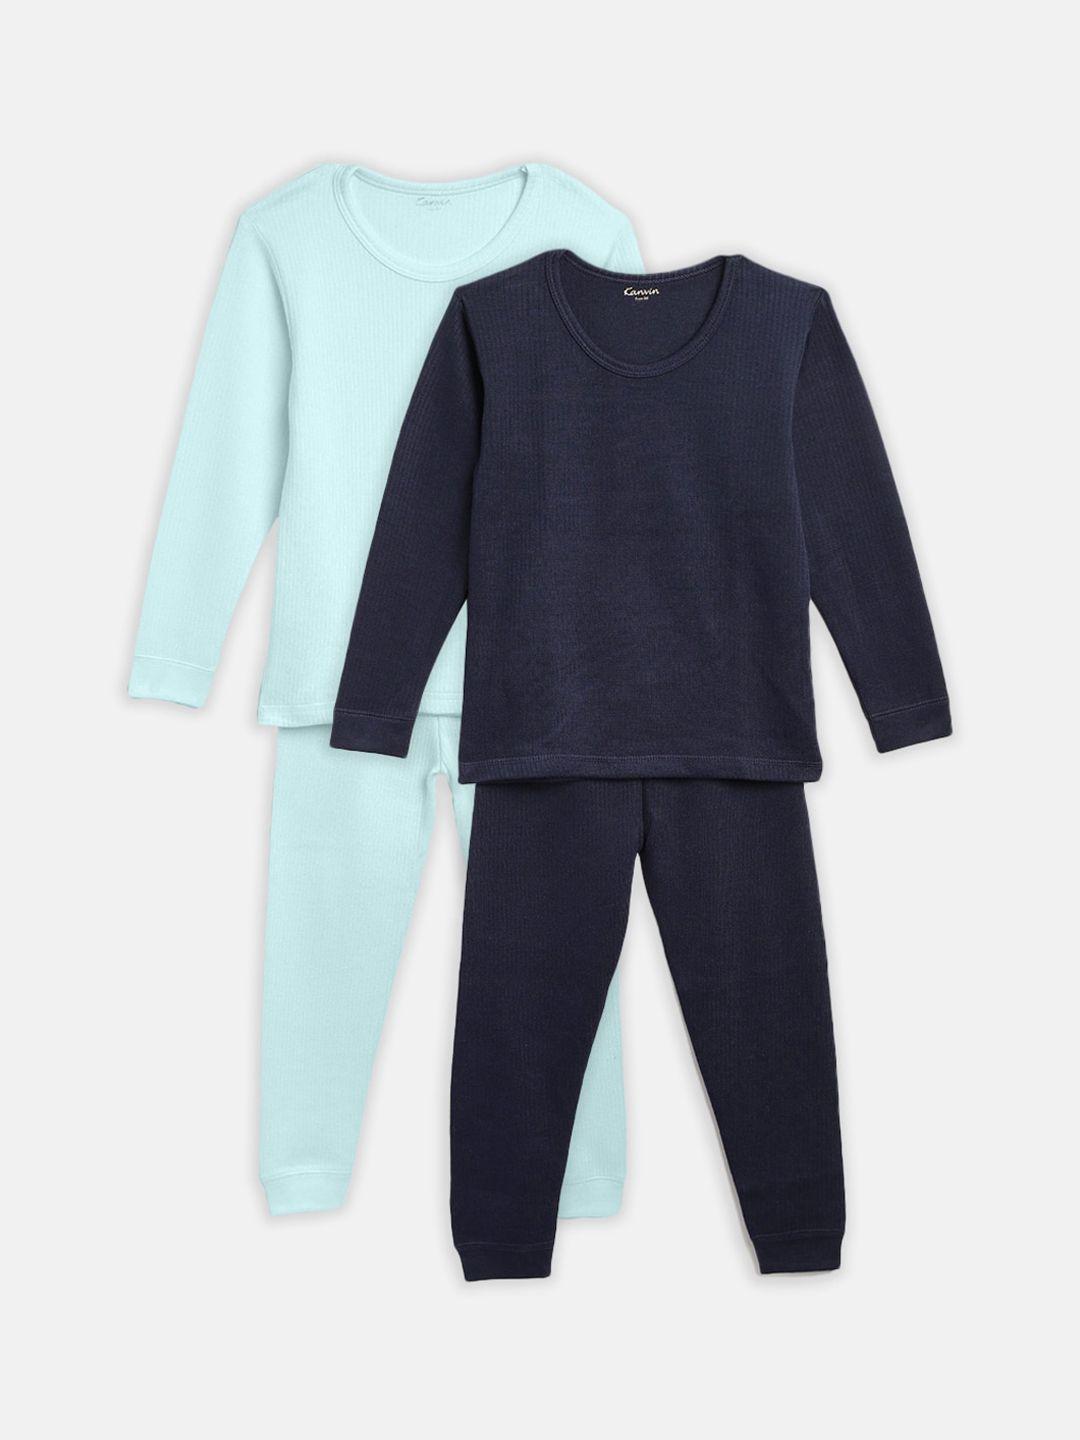 kanvin boys pack of 2 turquoise blue & navy blue solid thermal sets